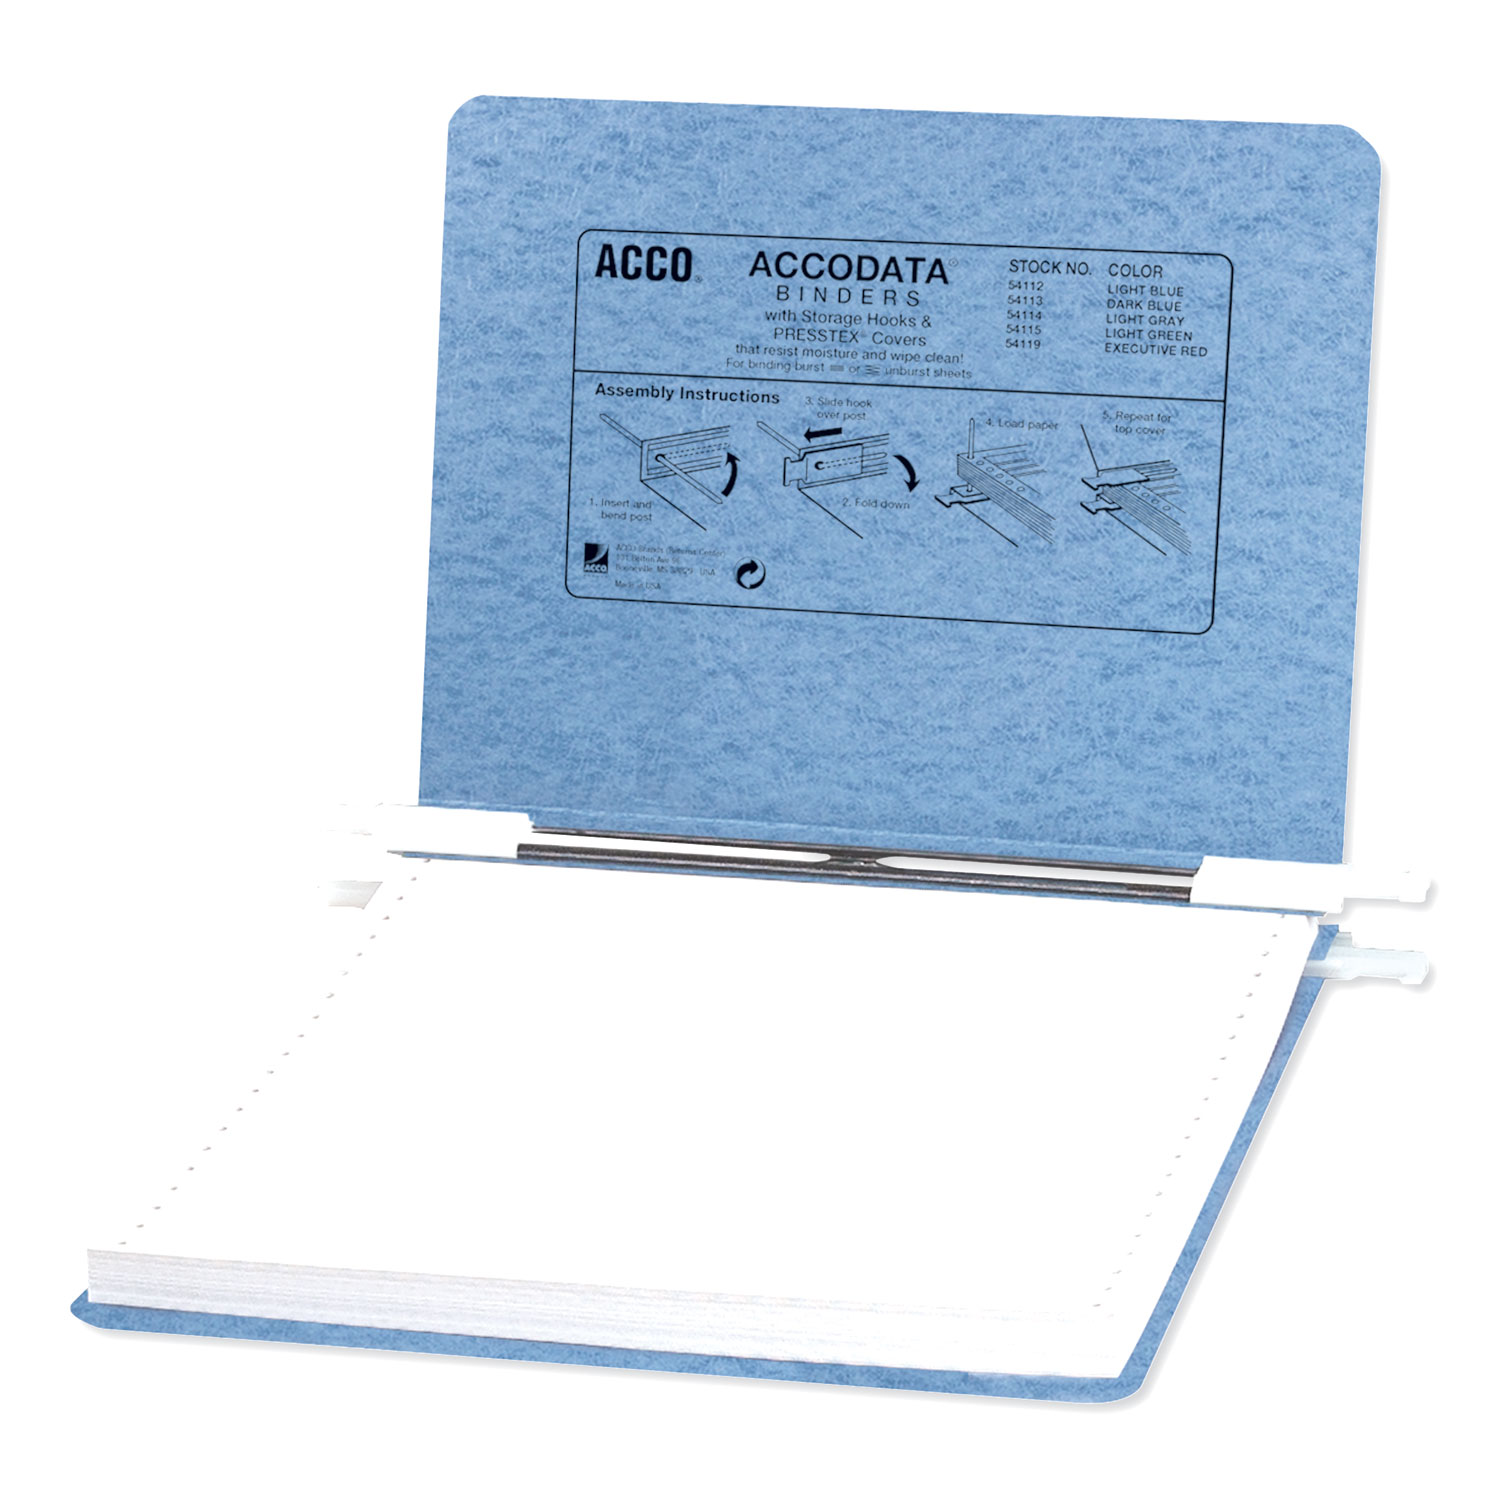  ACCO A7054112A PRESSTEX Covers with Storage Hooks, 2 Posts, 6 Capacity, 9.5 x 11, Light Blue (ACC54112) 